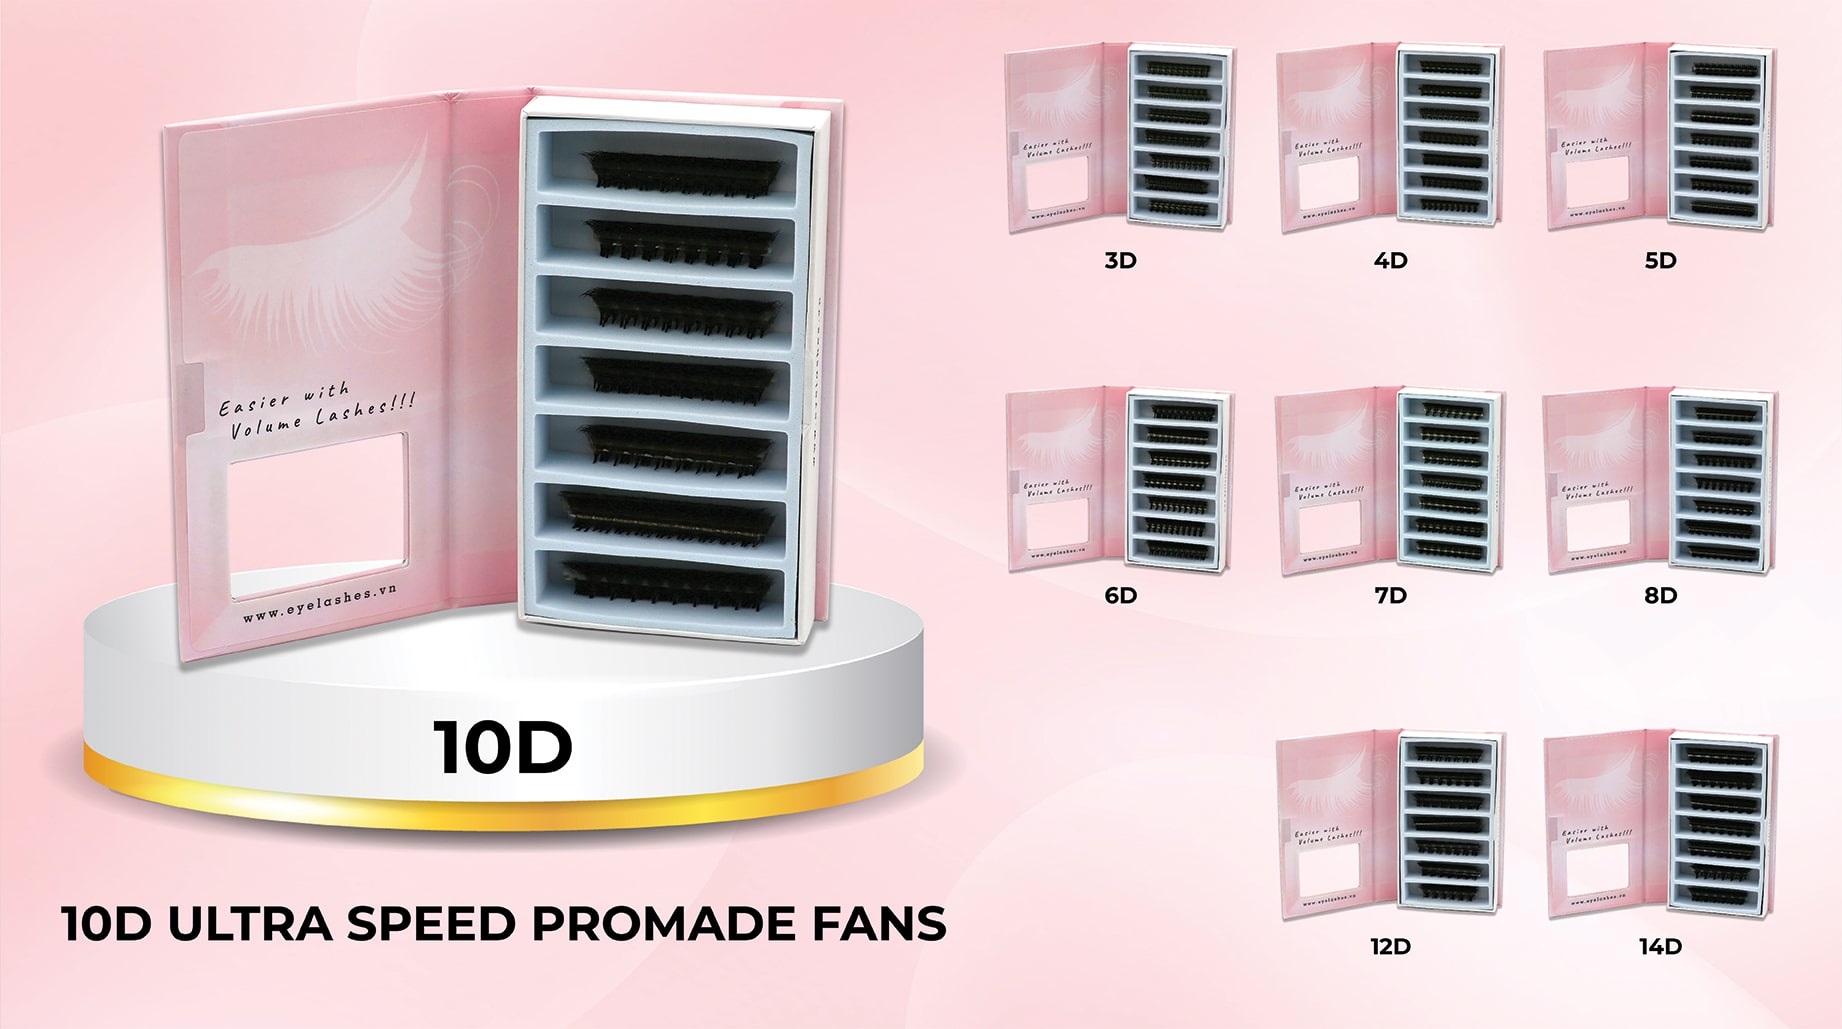 Ultra-Speed-10D-promade-fan-wholesale-eyelash-supplier-VNLASHES